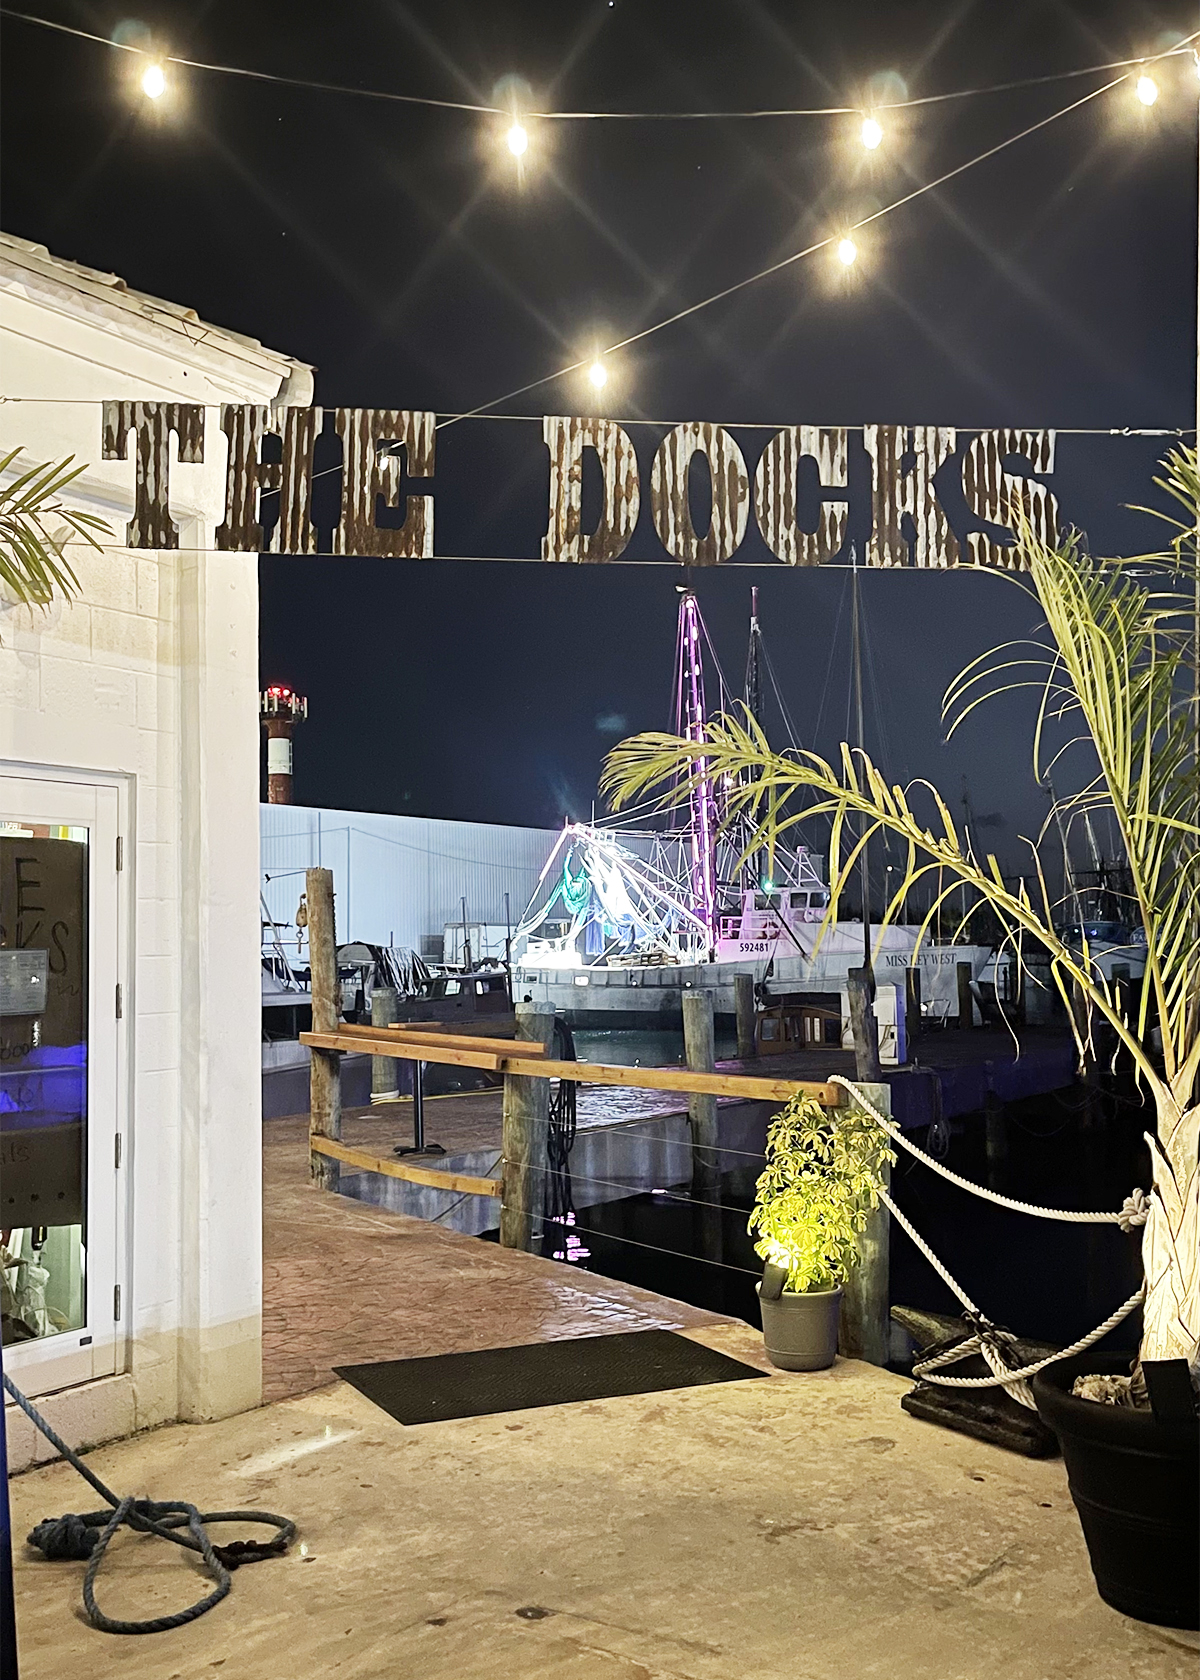 The Docks marquee sign at Stock island at the ocean docks at night